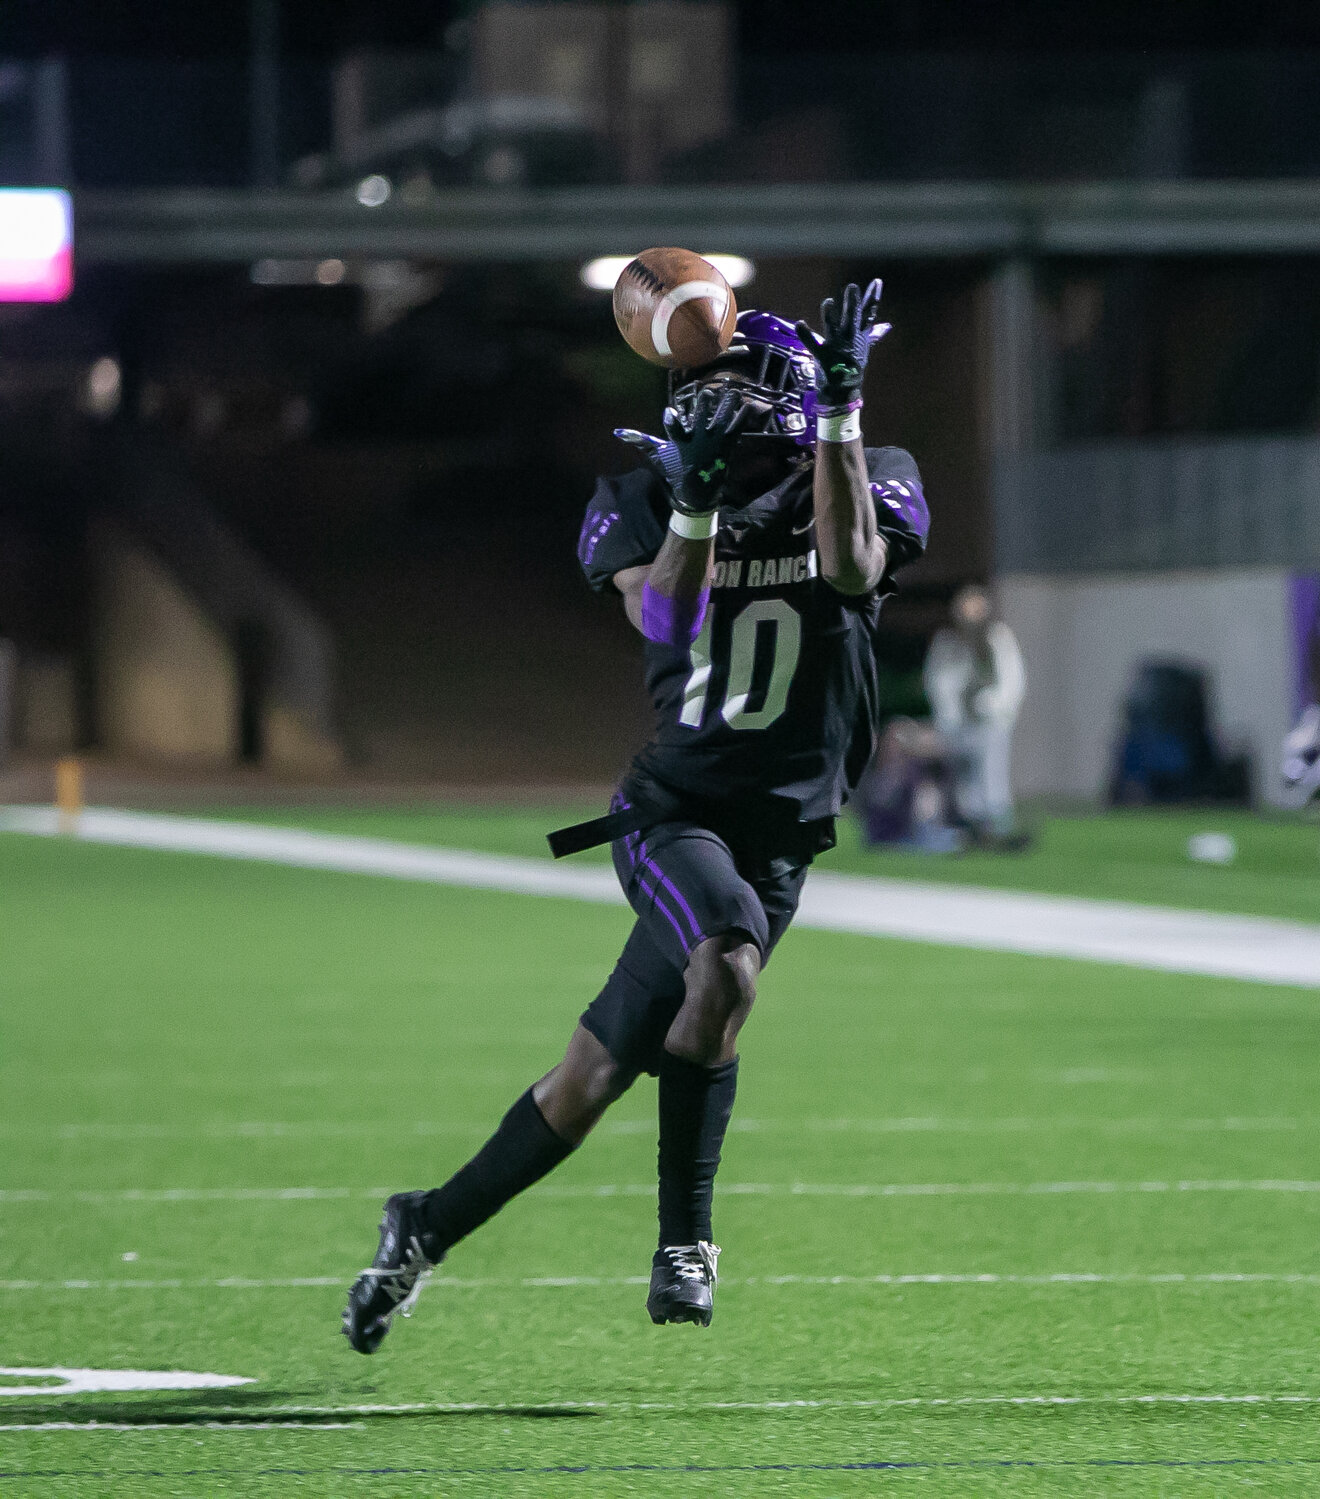 Martavian Hill makes a catch during Thursday's game between Jordan and Morton Ranch at Legacy Stadium.